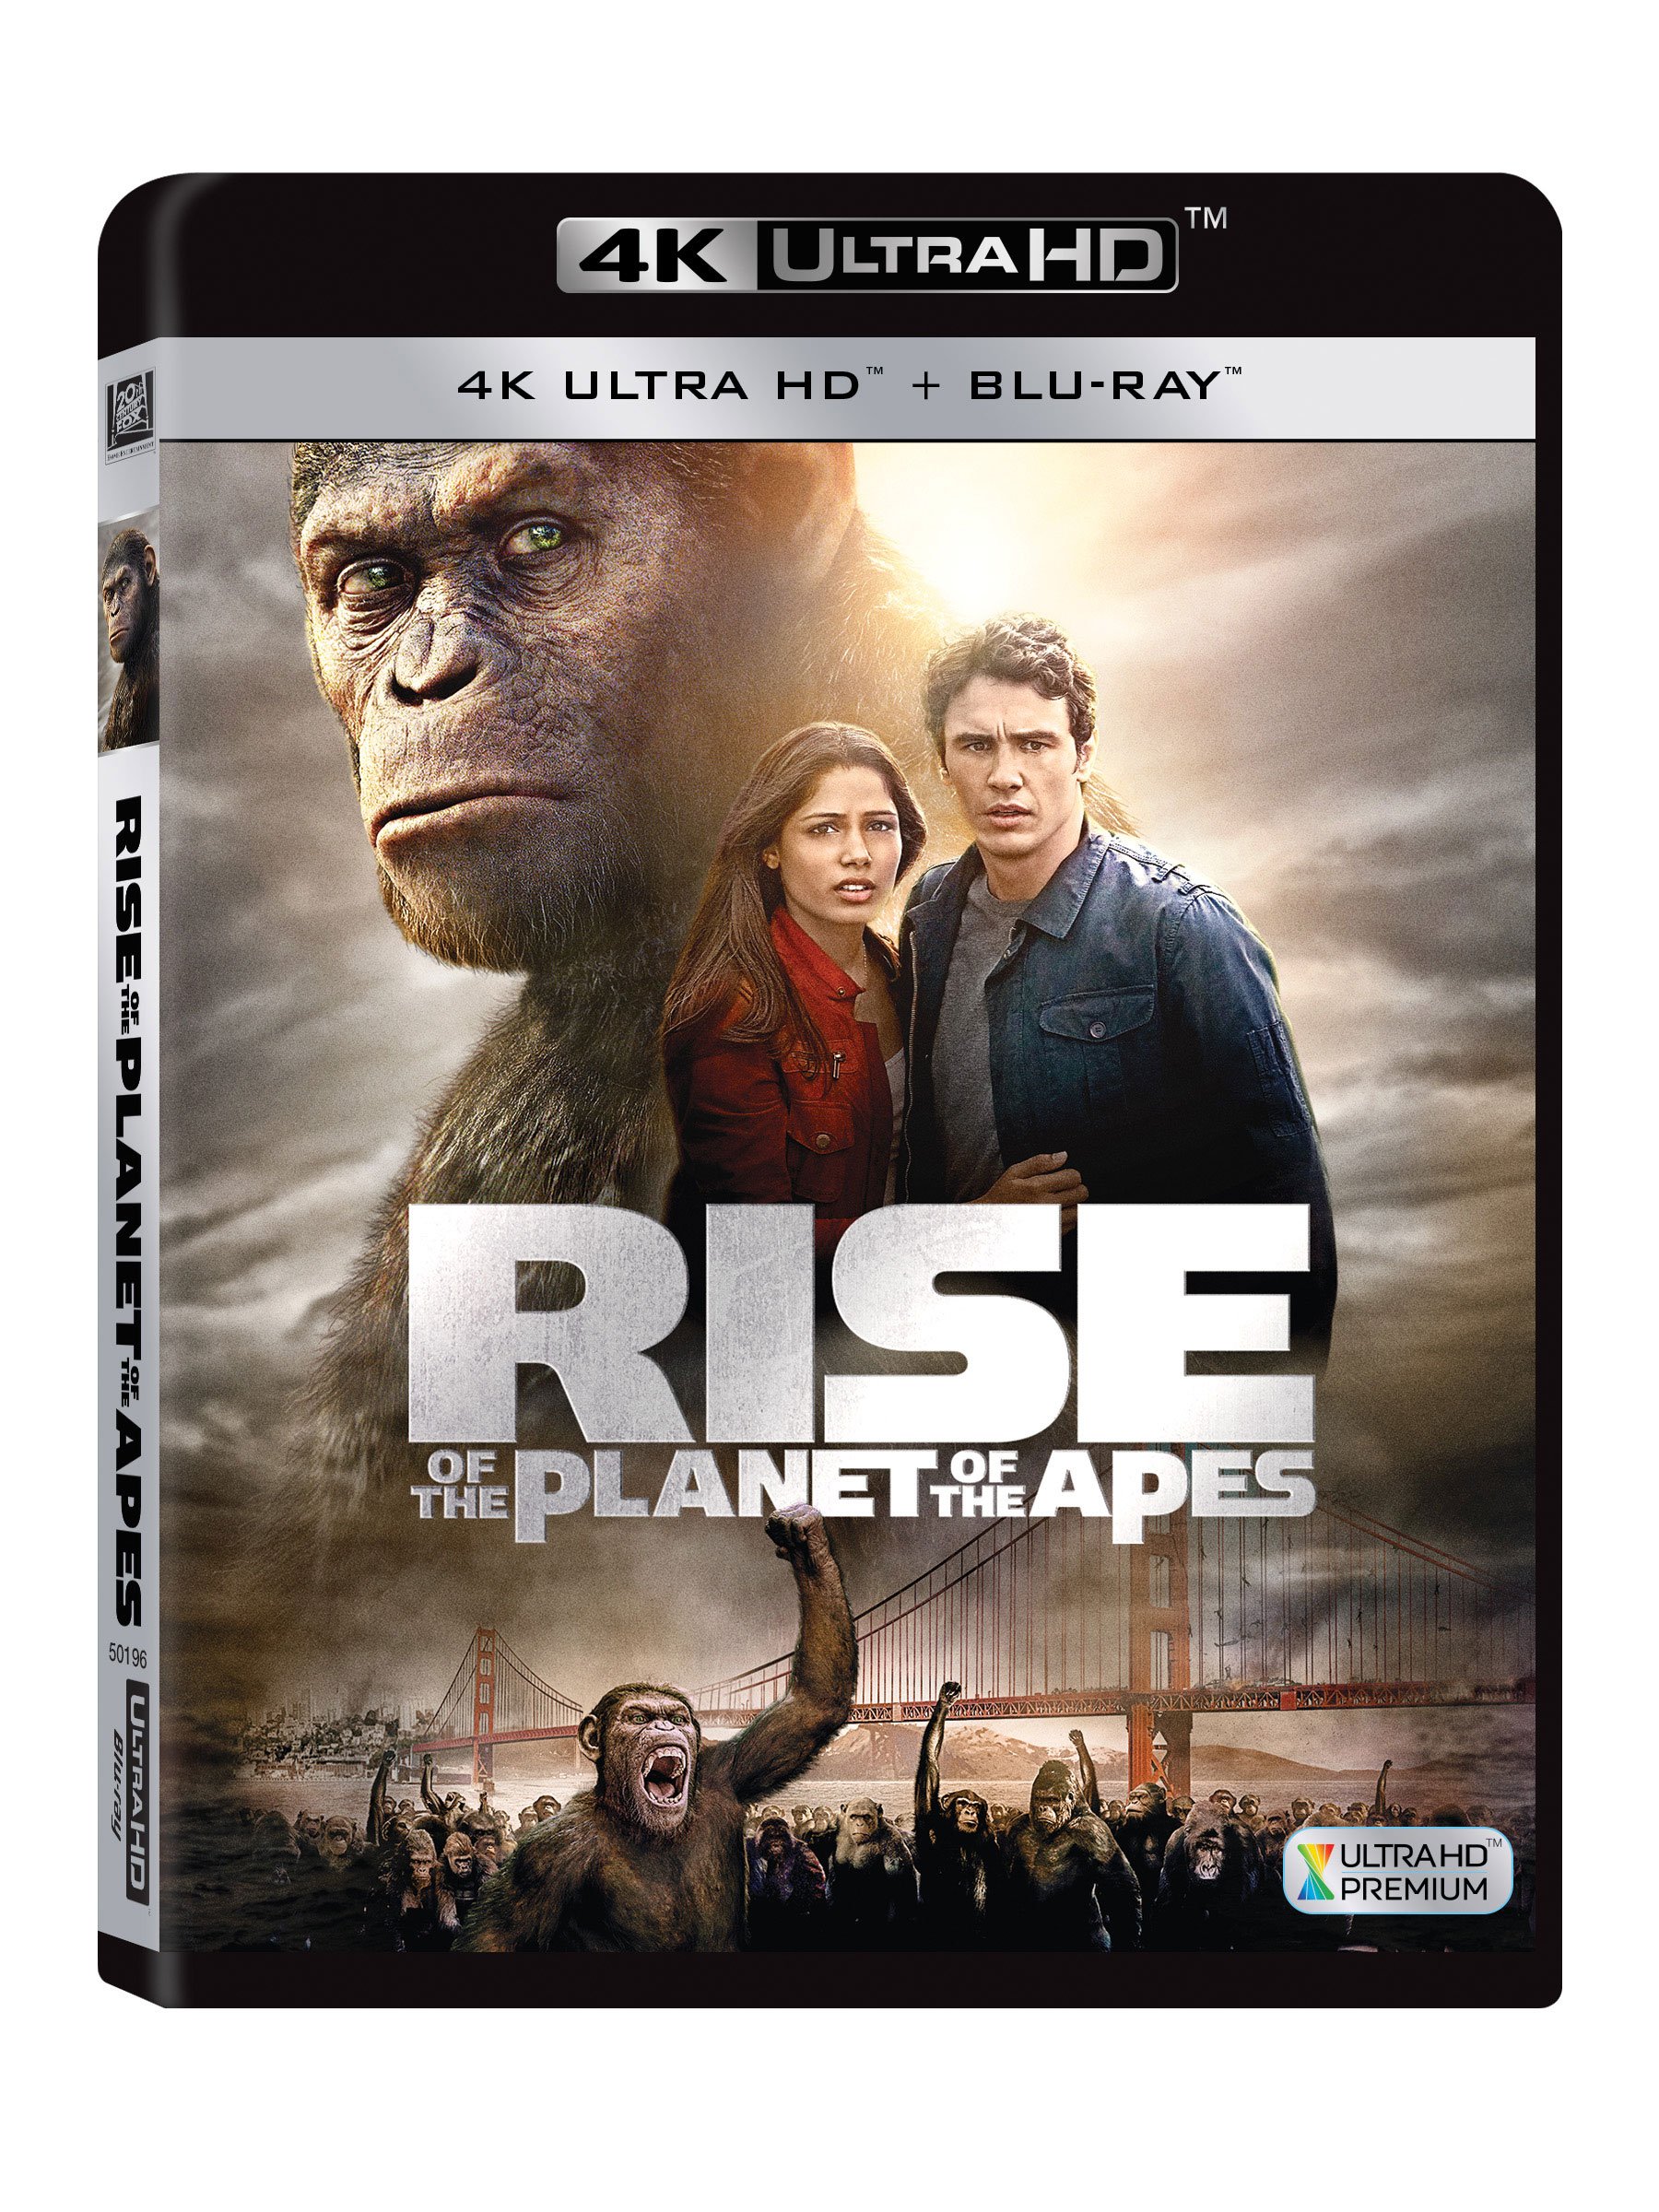 rise-of-the-planet-of-the-apes-4k-uhd-and-hd-2-disc-movie-purchase